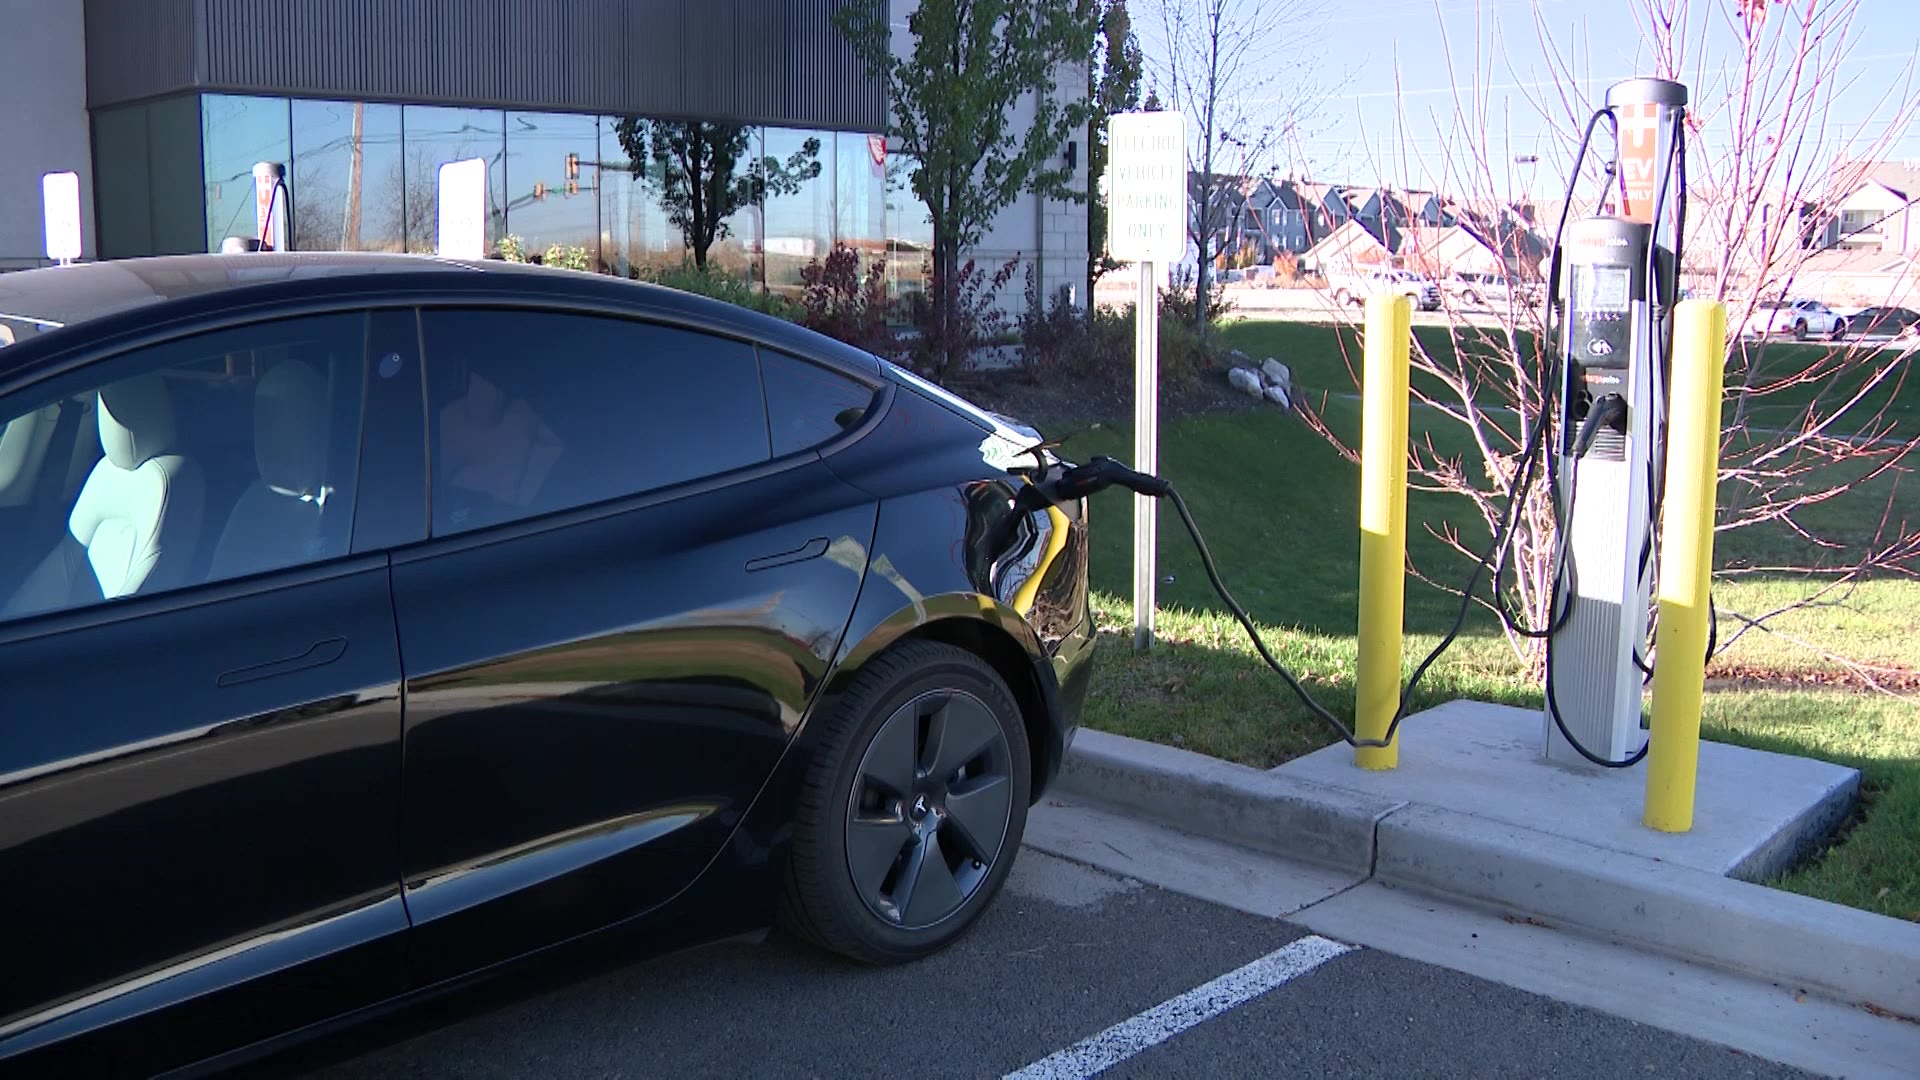 On Tuesday, the Utah Department of Transportation announced 15 new fast charging sites will be comi...